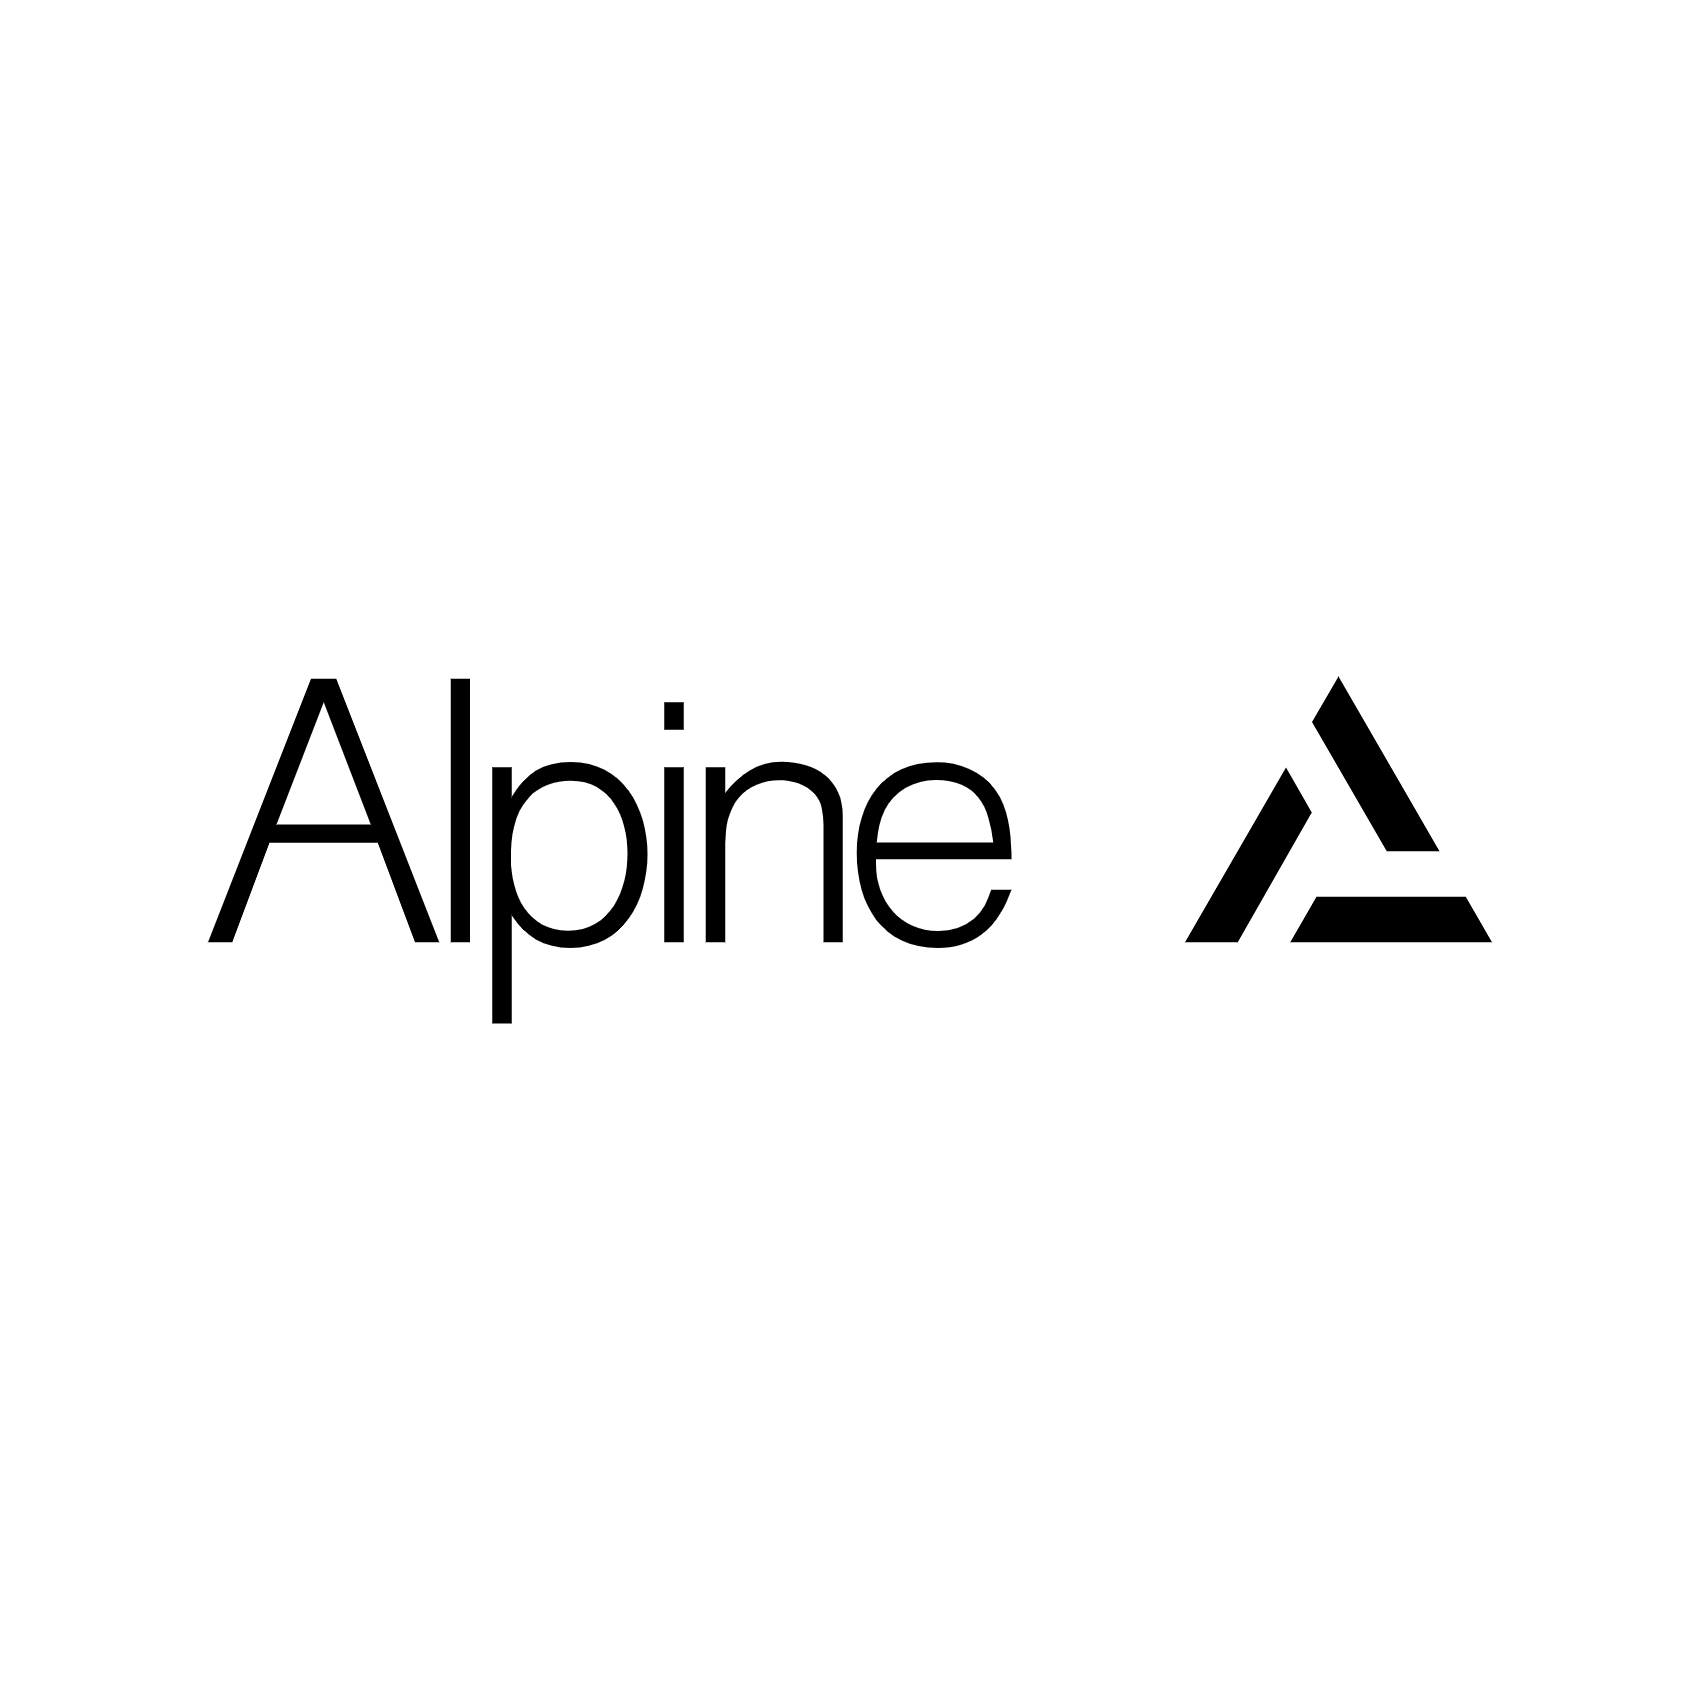 Download Alpine Logo PNG and Vector (PDF, SVG, Ai, EPS) Free